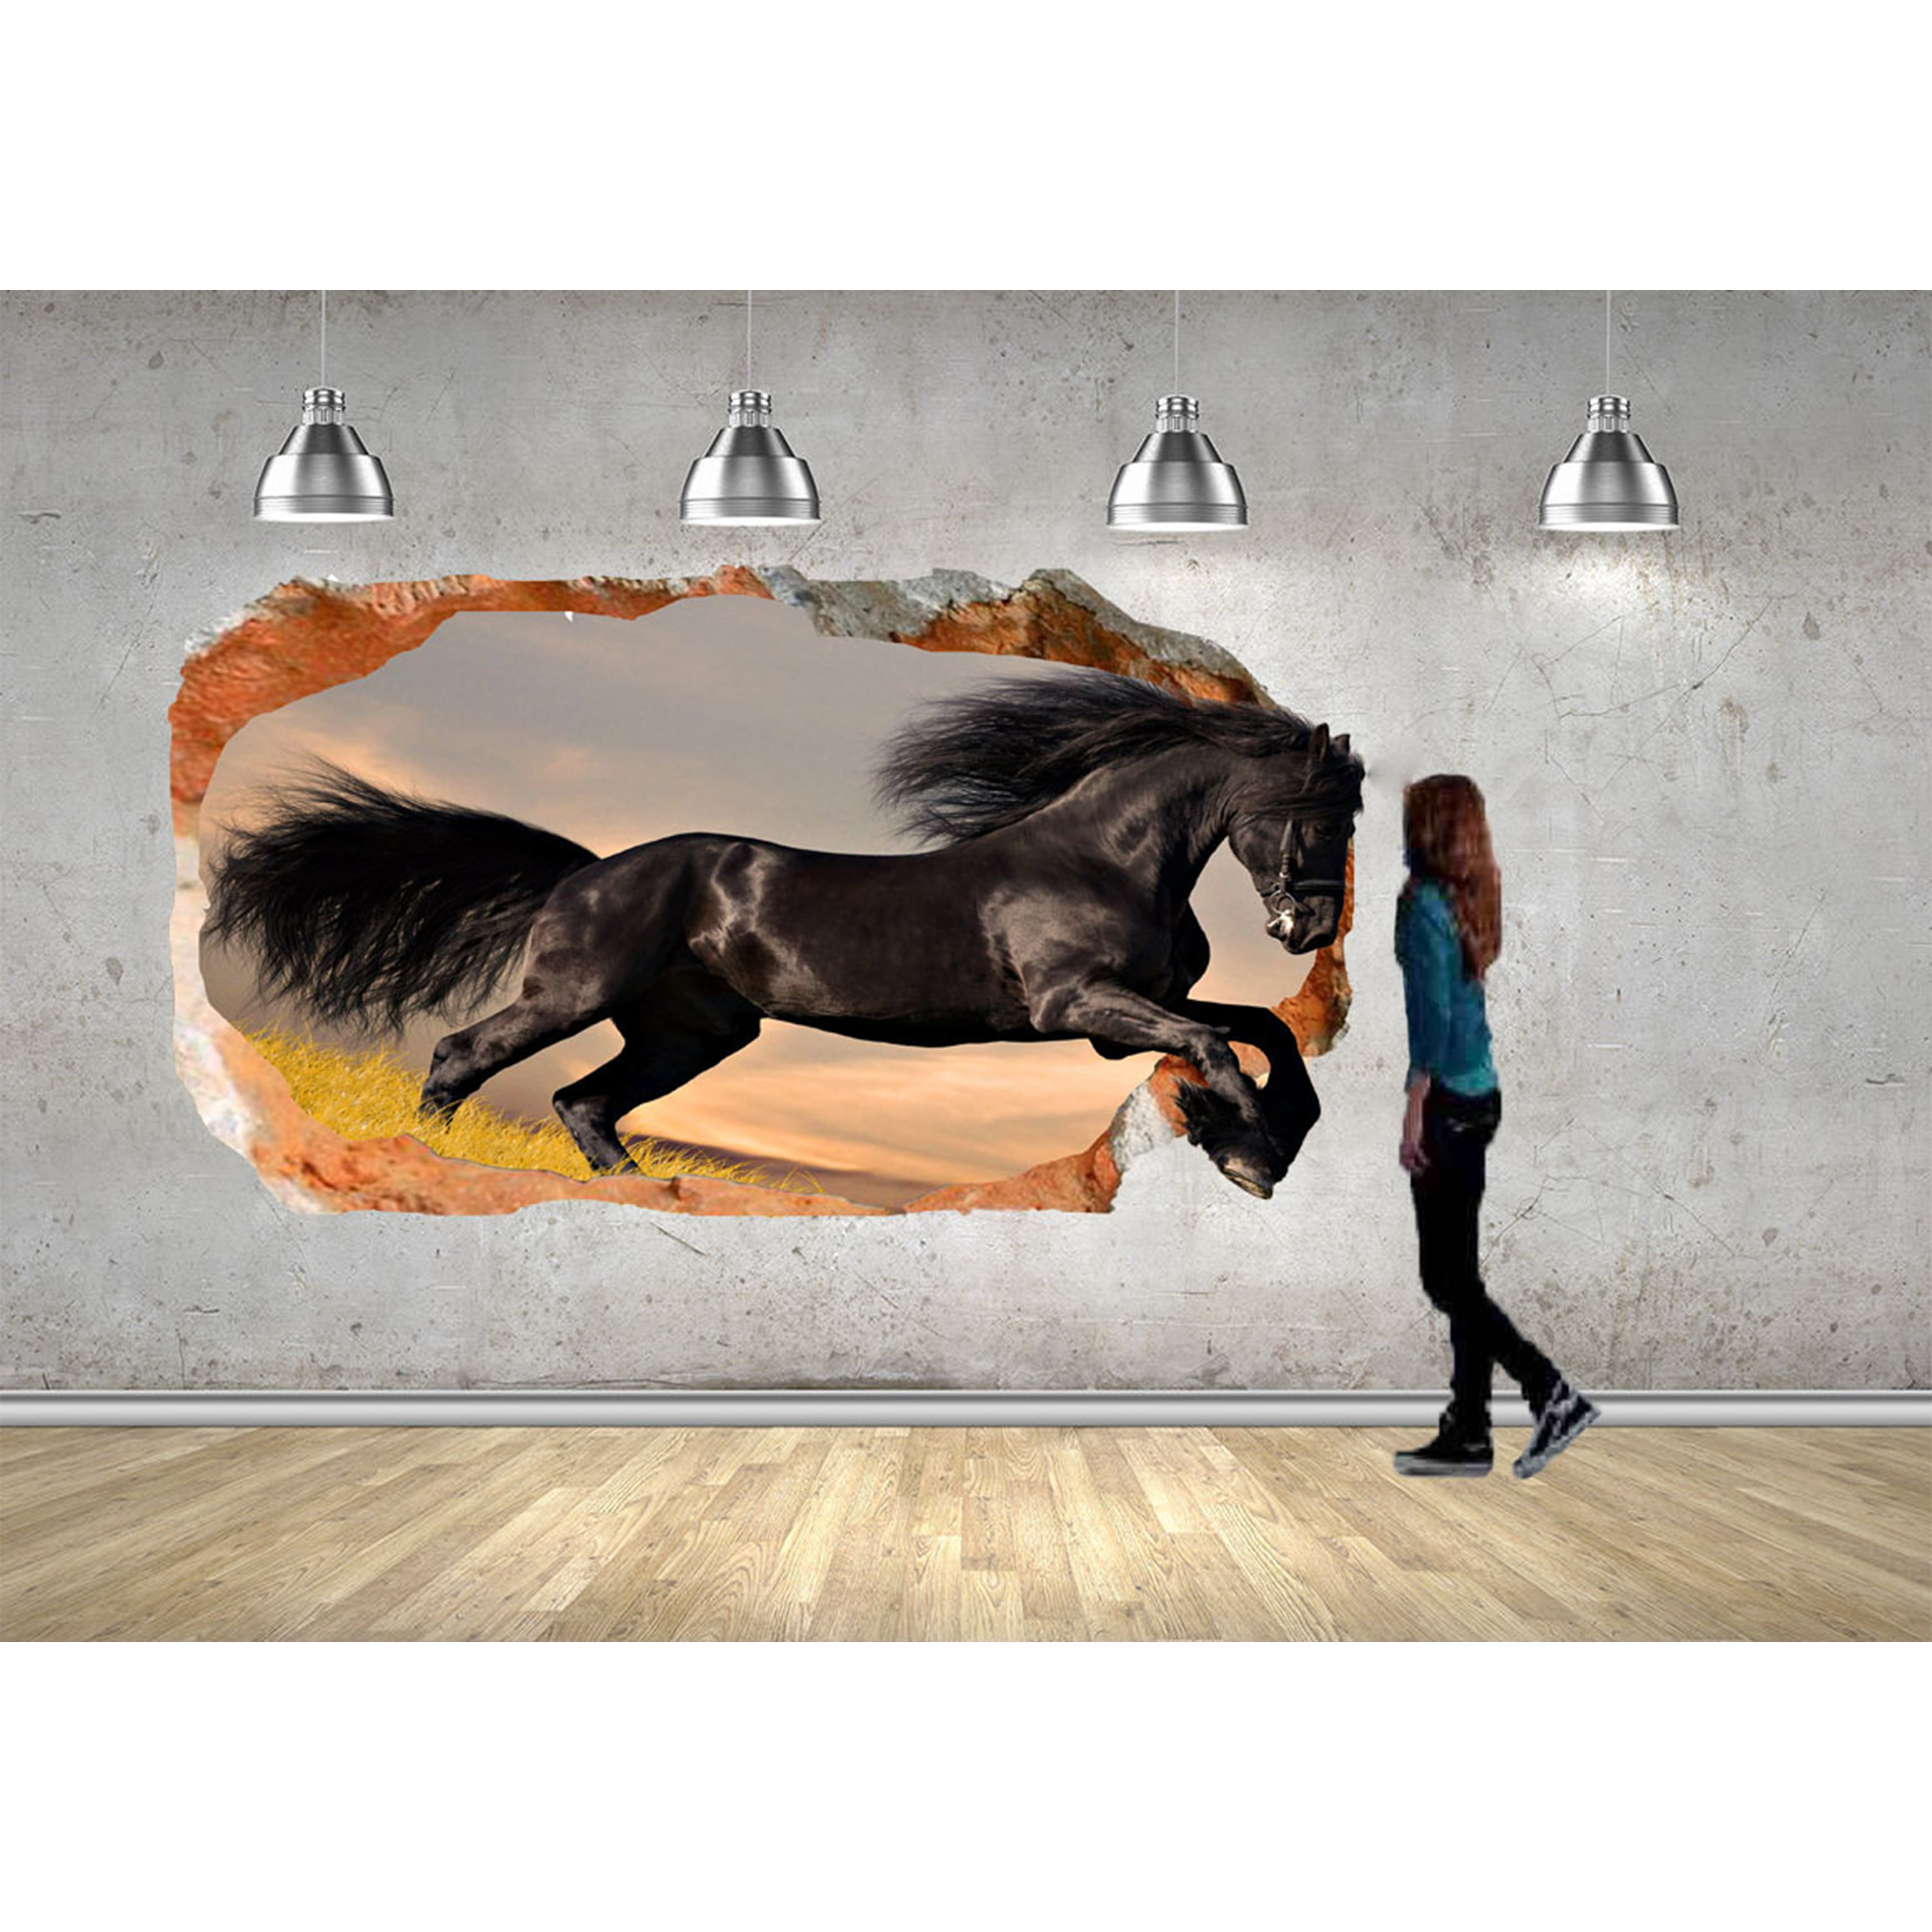 Startonight 3D Mural Wall Art Photo Decor Black Horse Amazing Dual View  Surprise Wall Mural Wallpaper for Bedroom Animals Wall Art Gift Large   '' By  '' 